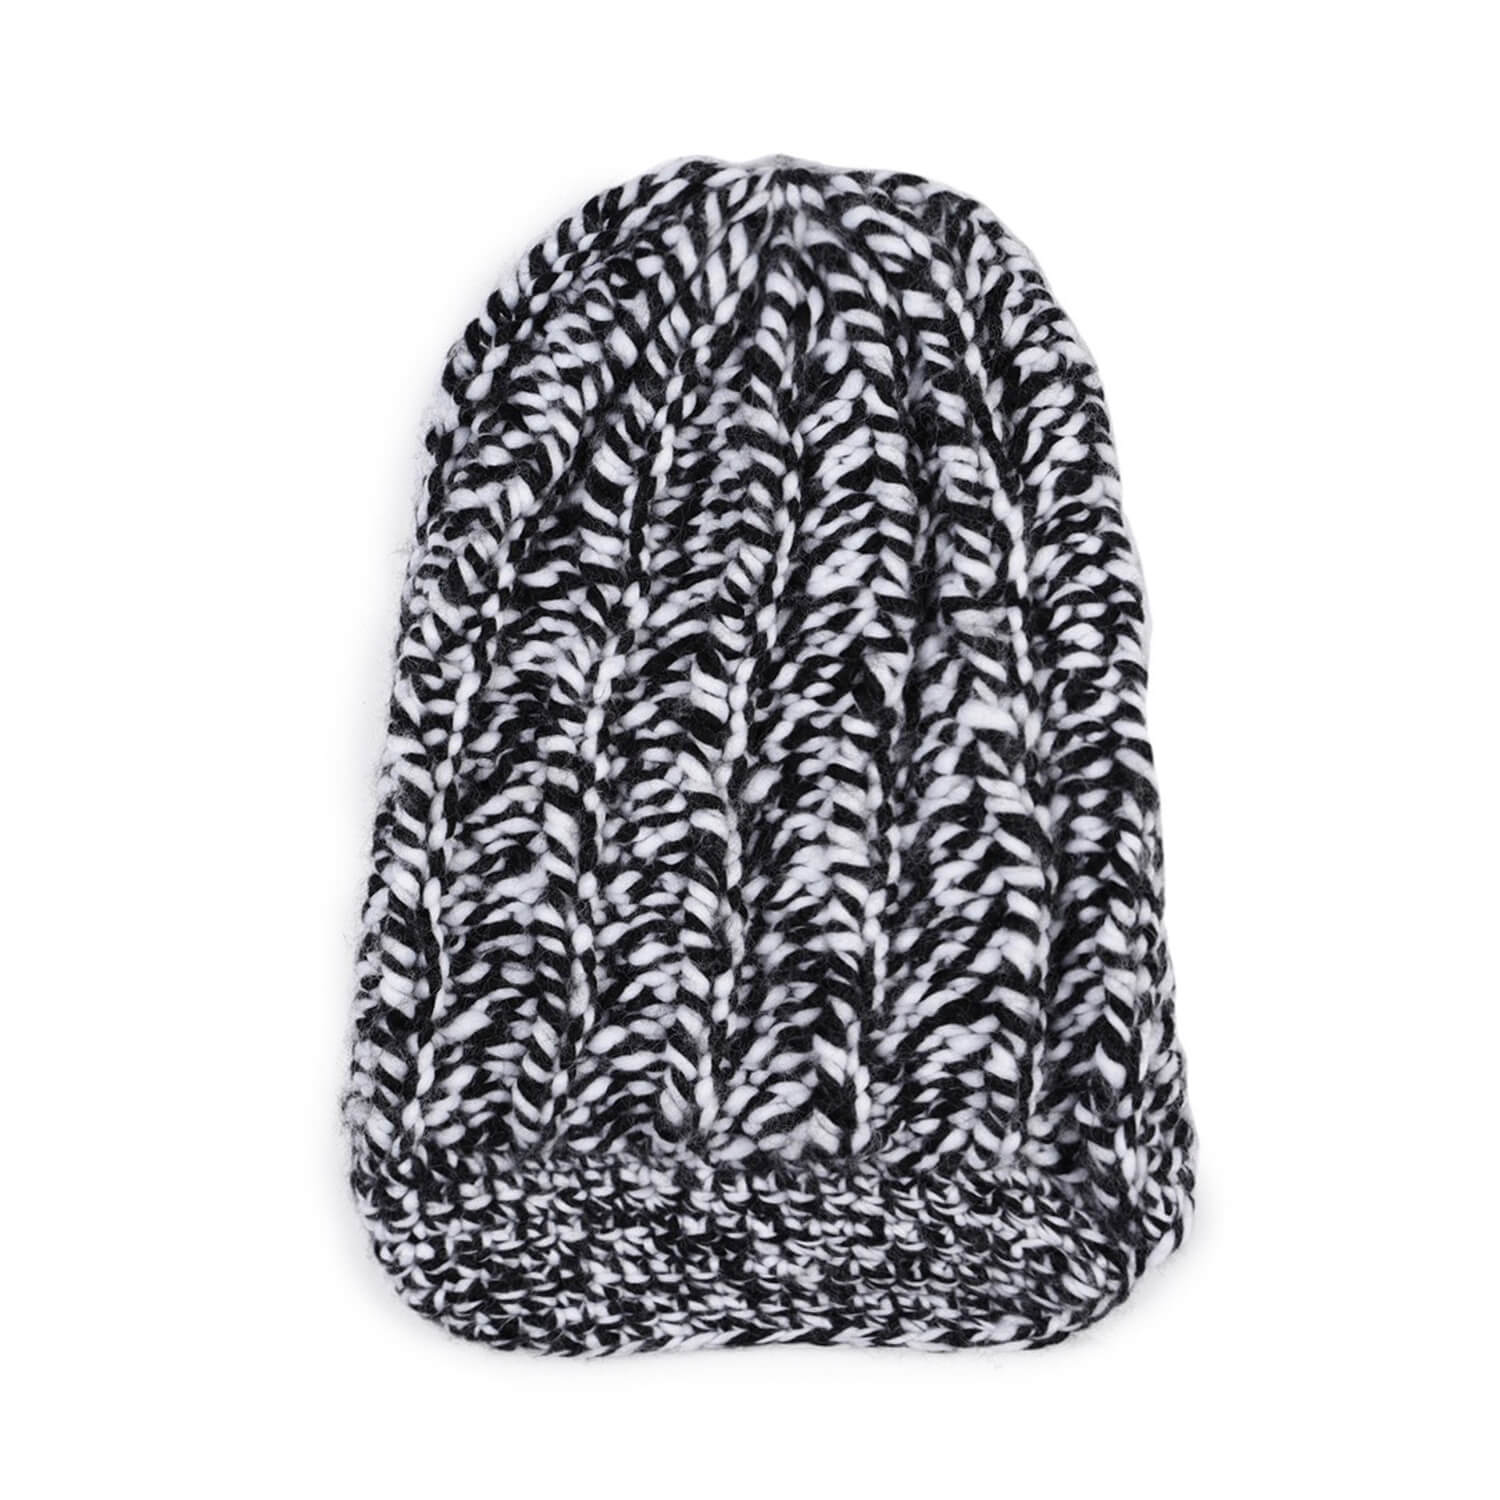 Slouch Beanie with Flap - 2883